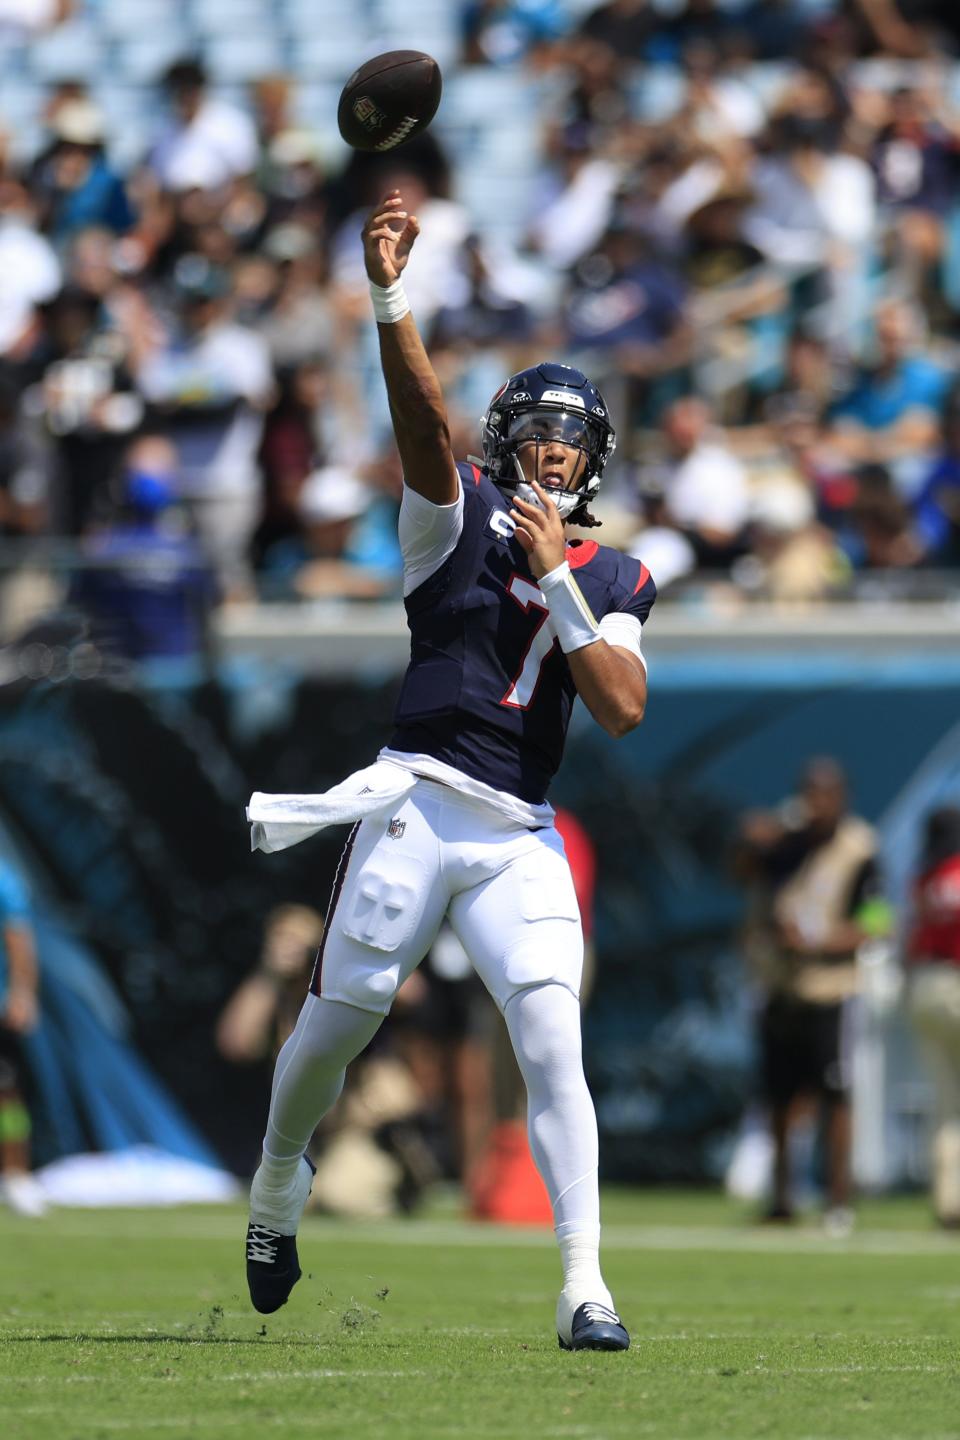 Houston Texans quarterback C.J. Stroud (7) throws the ball during the first quarter of an NFL football matchup Sunday, Sept. 24, 2023 at EverBank Stadium in Jacksonville, Fla. The Houston Texans defeated the Jacksonville Jaguars 37-17. [Corey Perrine/Florida Times-Union]